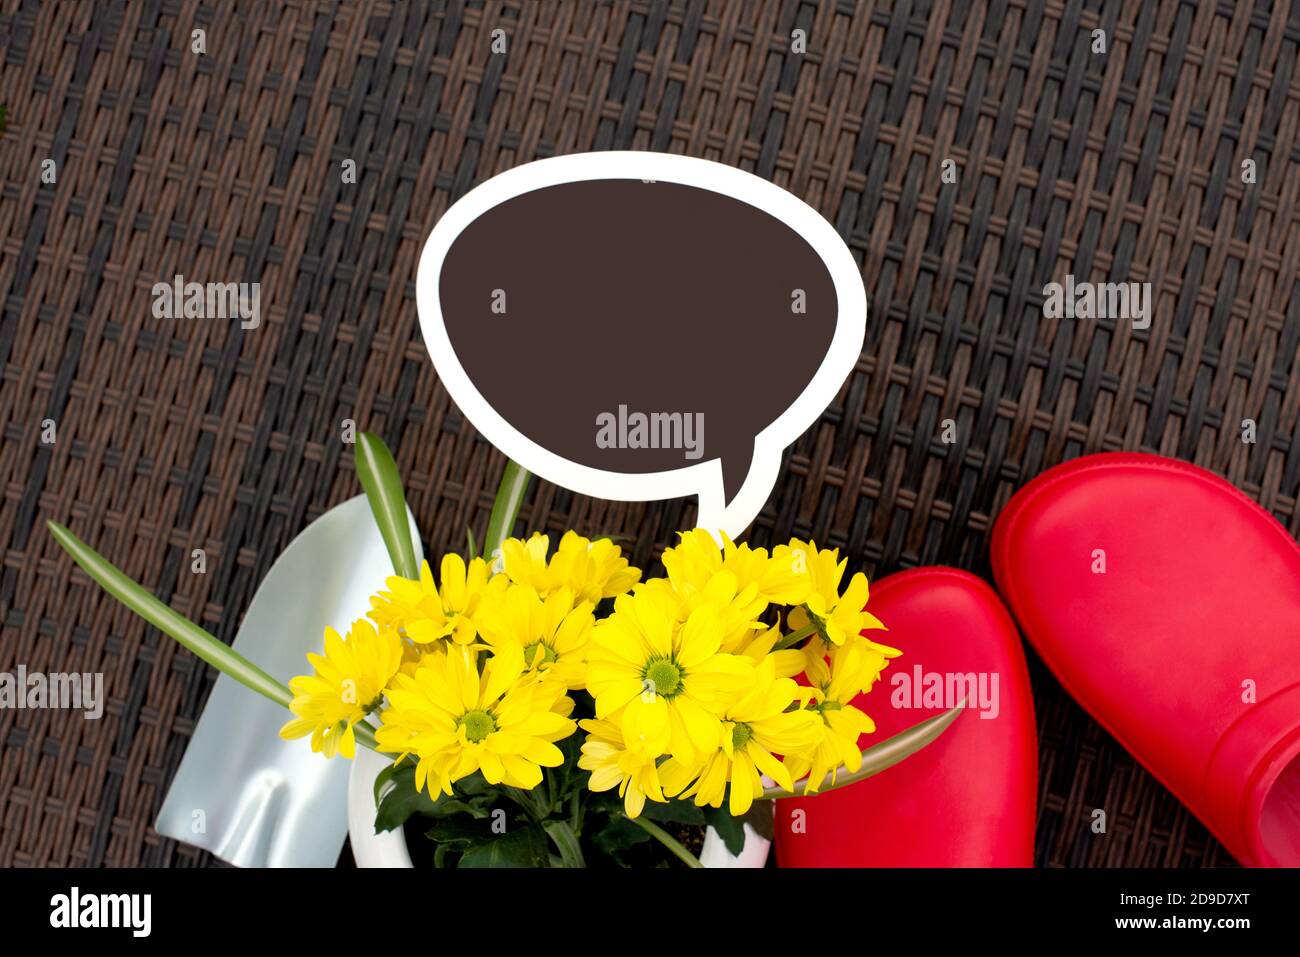 Gardening. work in the garden. tools, watering can and flower in a pot on wicker rattan background. Copy space. Black chalk Stock Photo